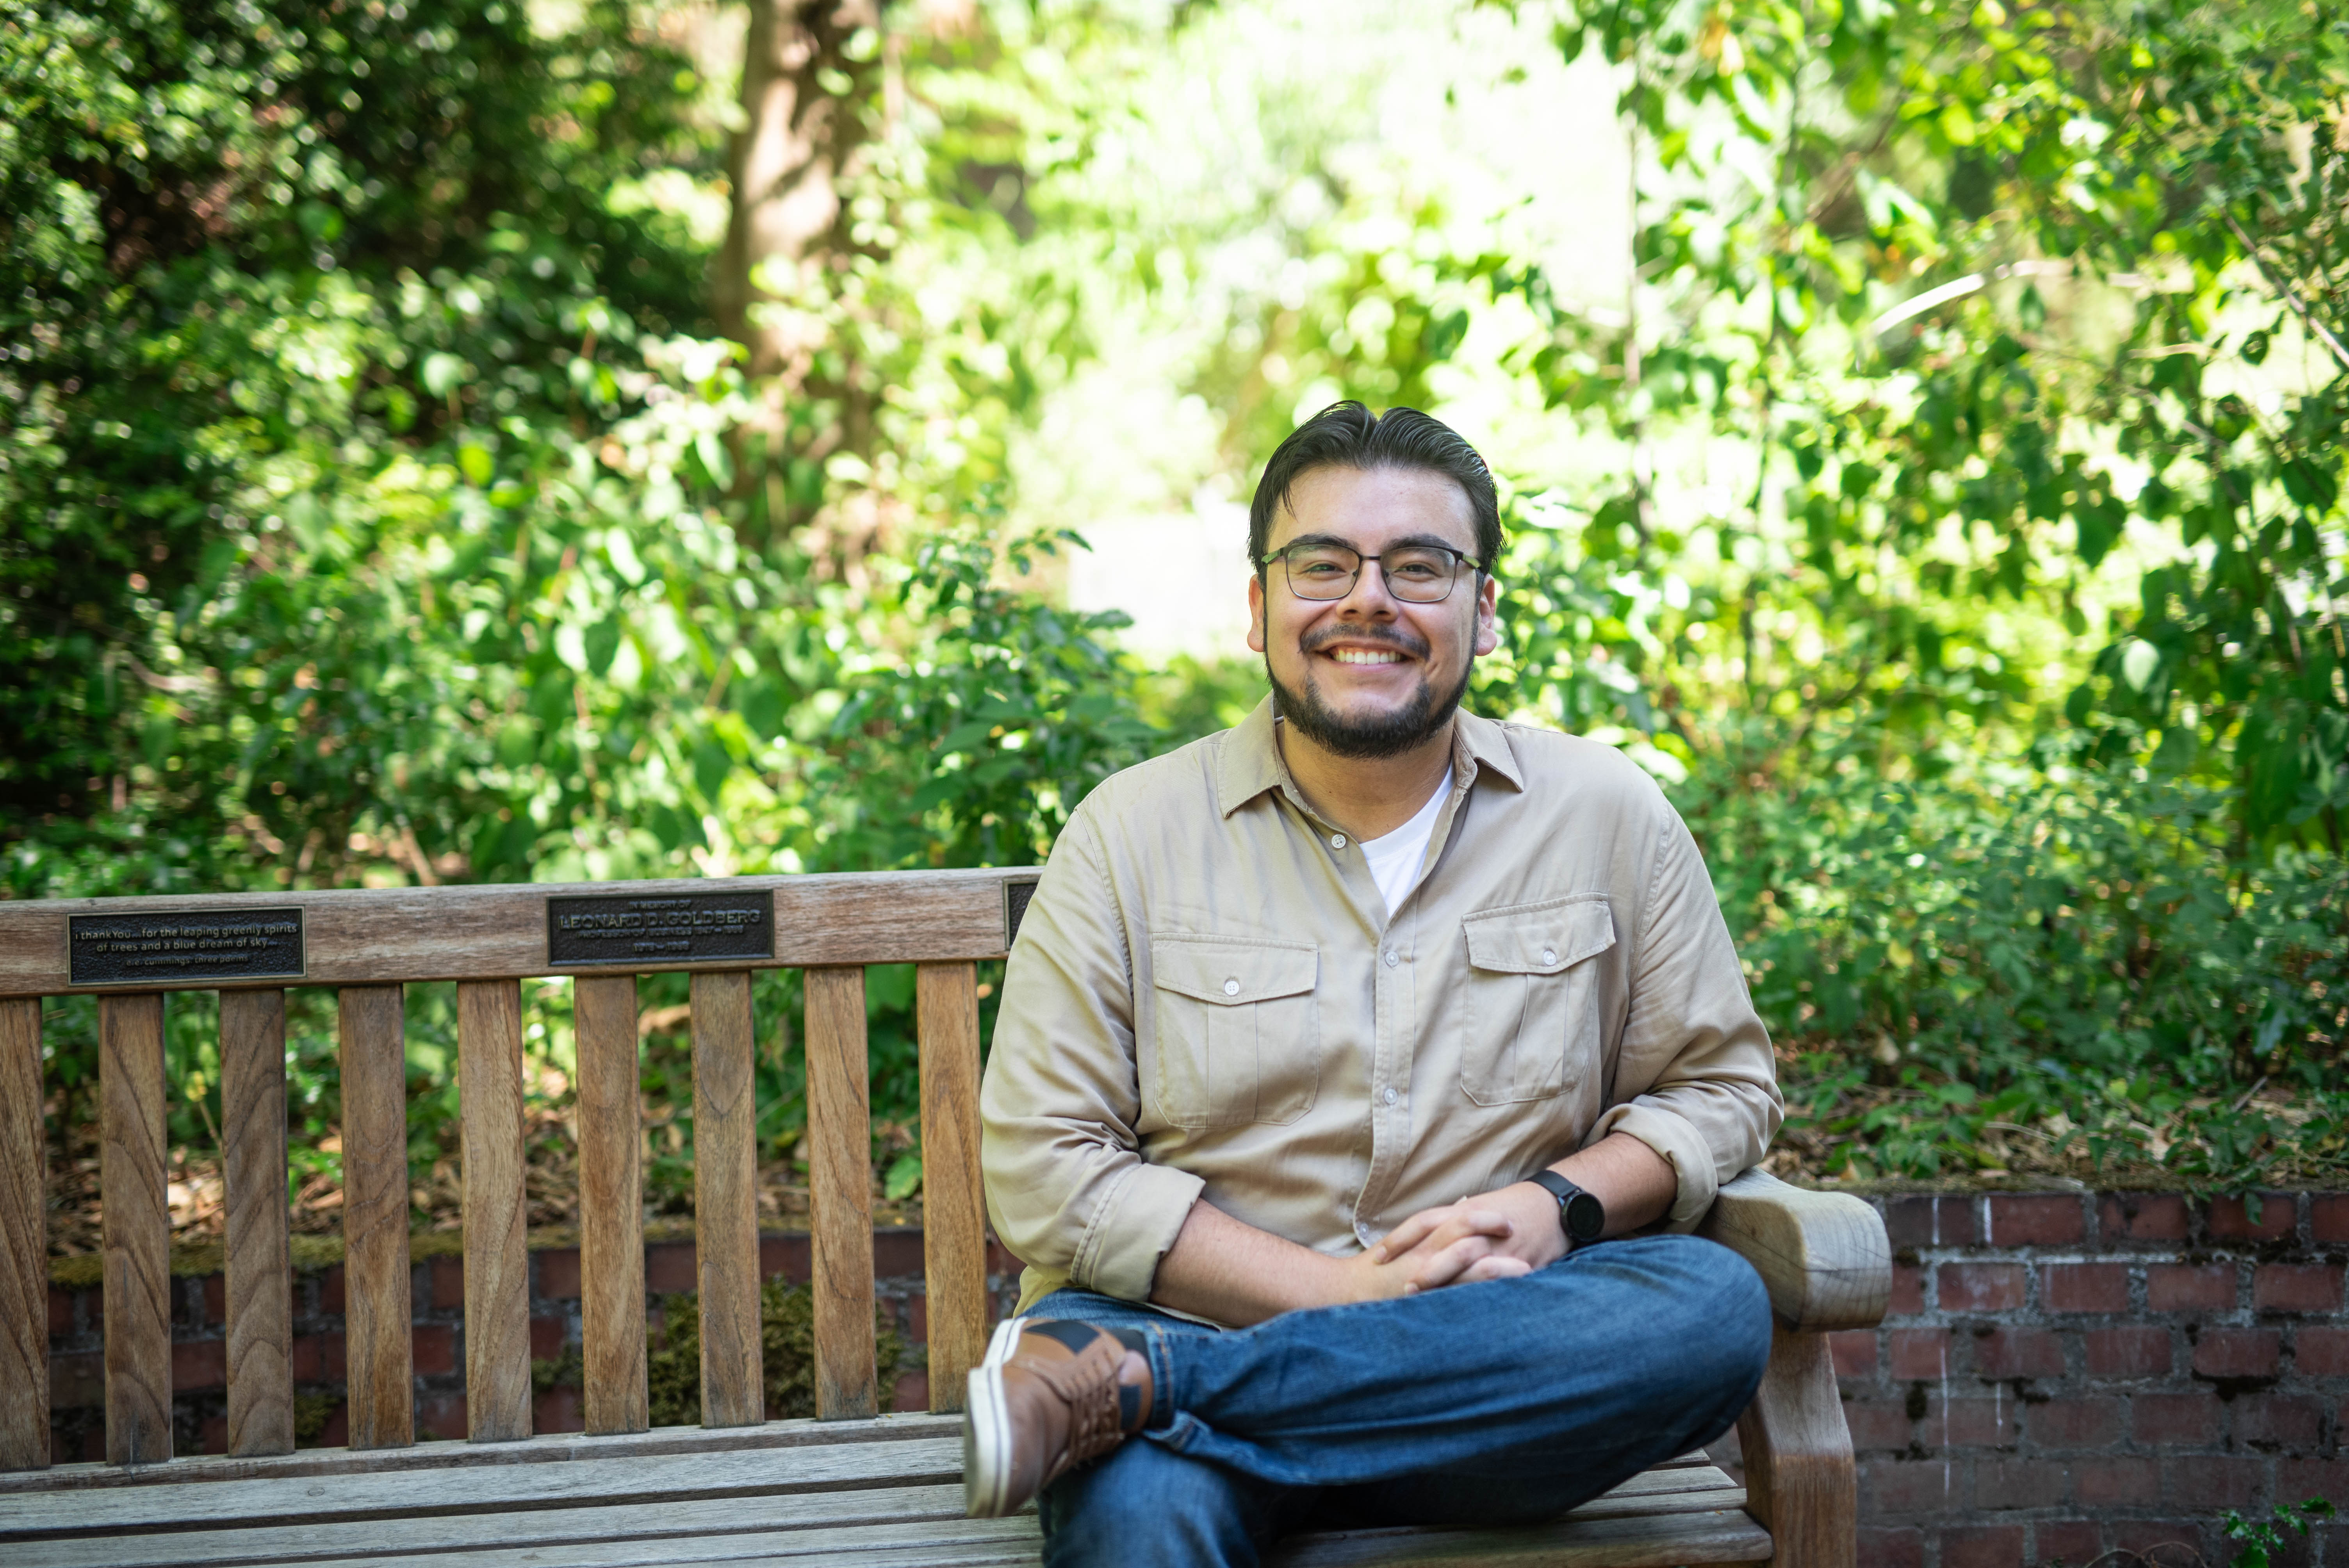 A man in glasses and a tan shirt sits on an outdoor bench.